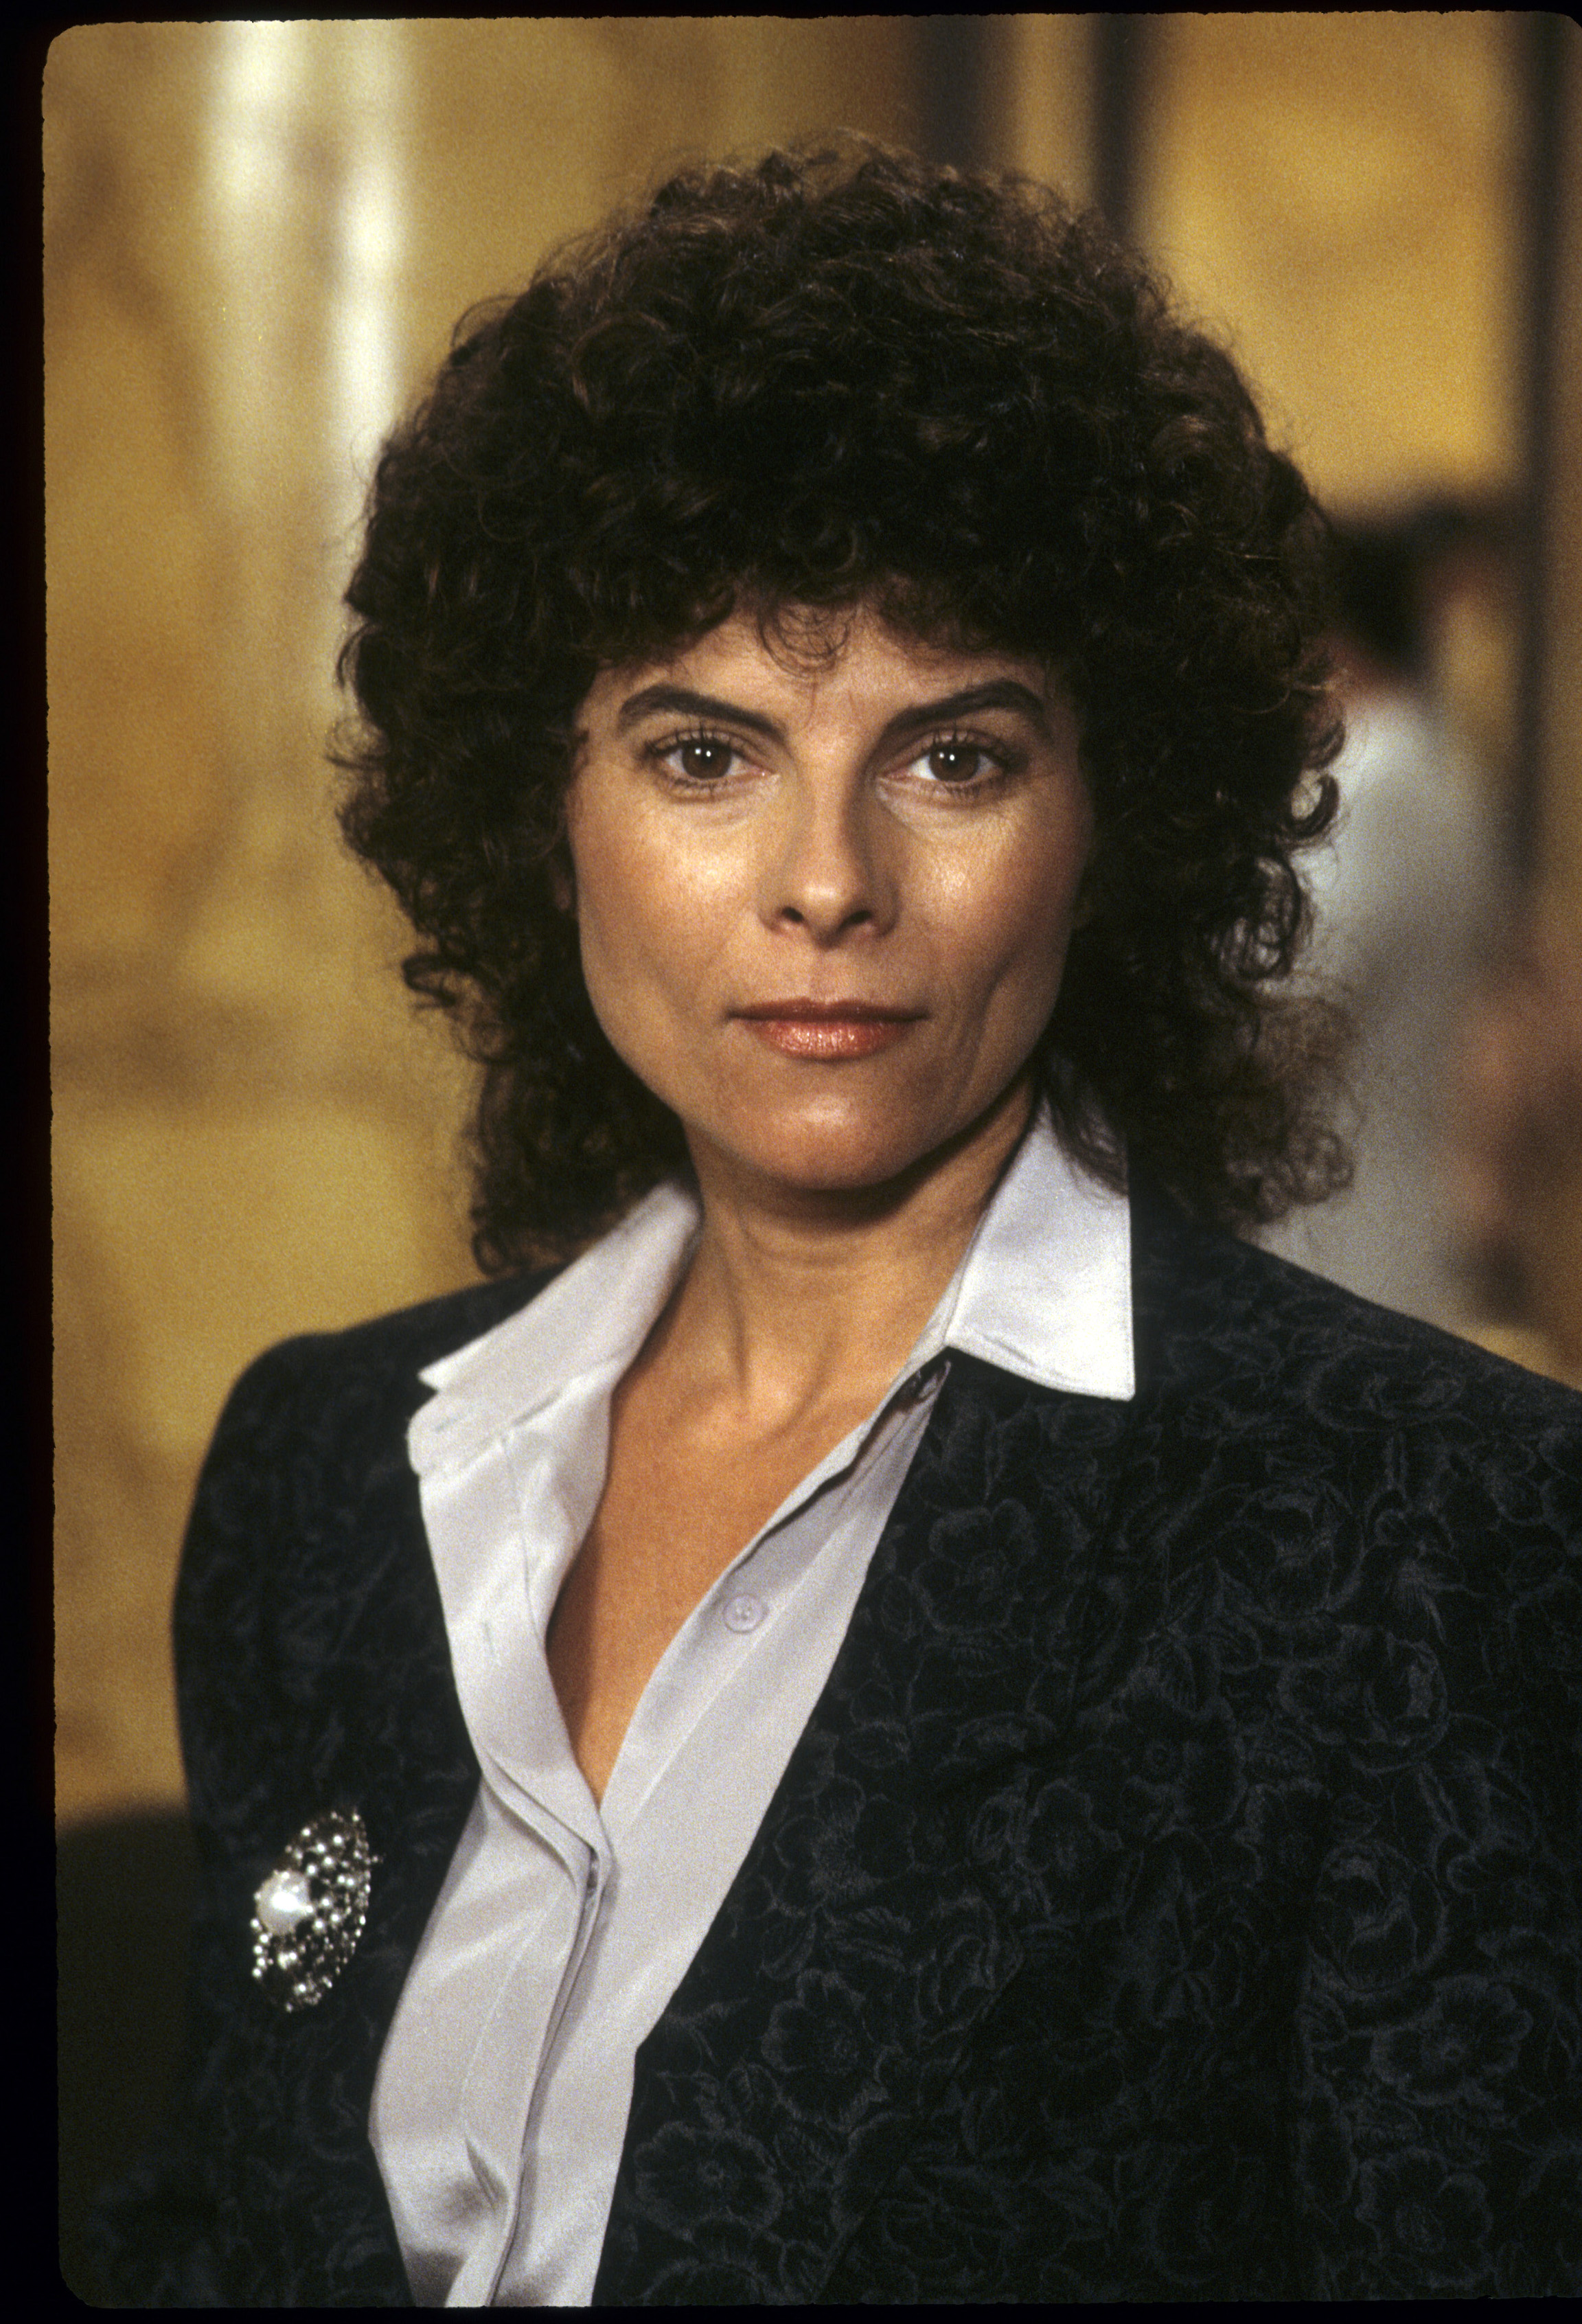 Adrienne Barbeau on "Shadow Play" in 1986 | Source: Getty Images